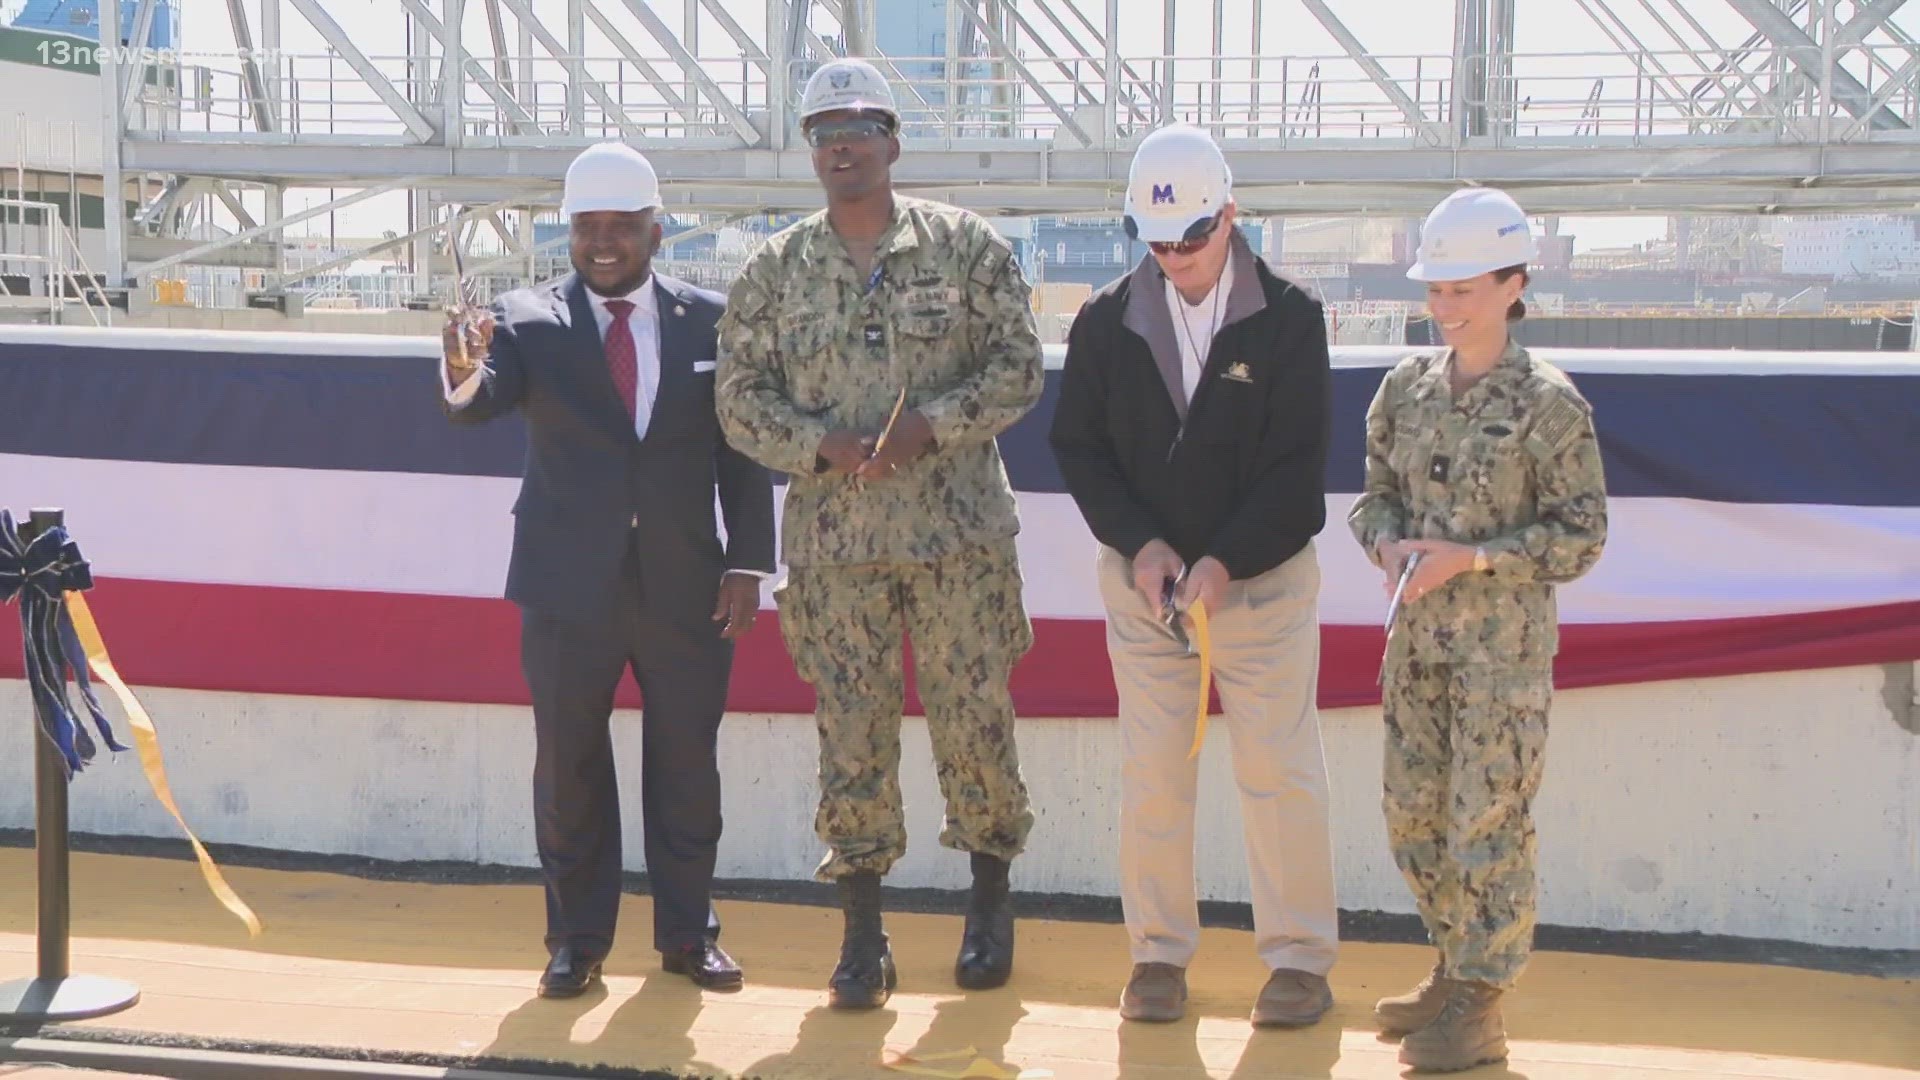 Shipyard officials cut the ribbon to welcome new changes Wednesday.